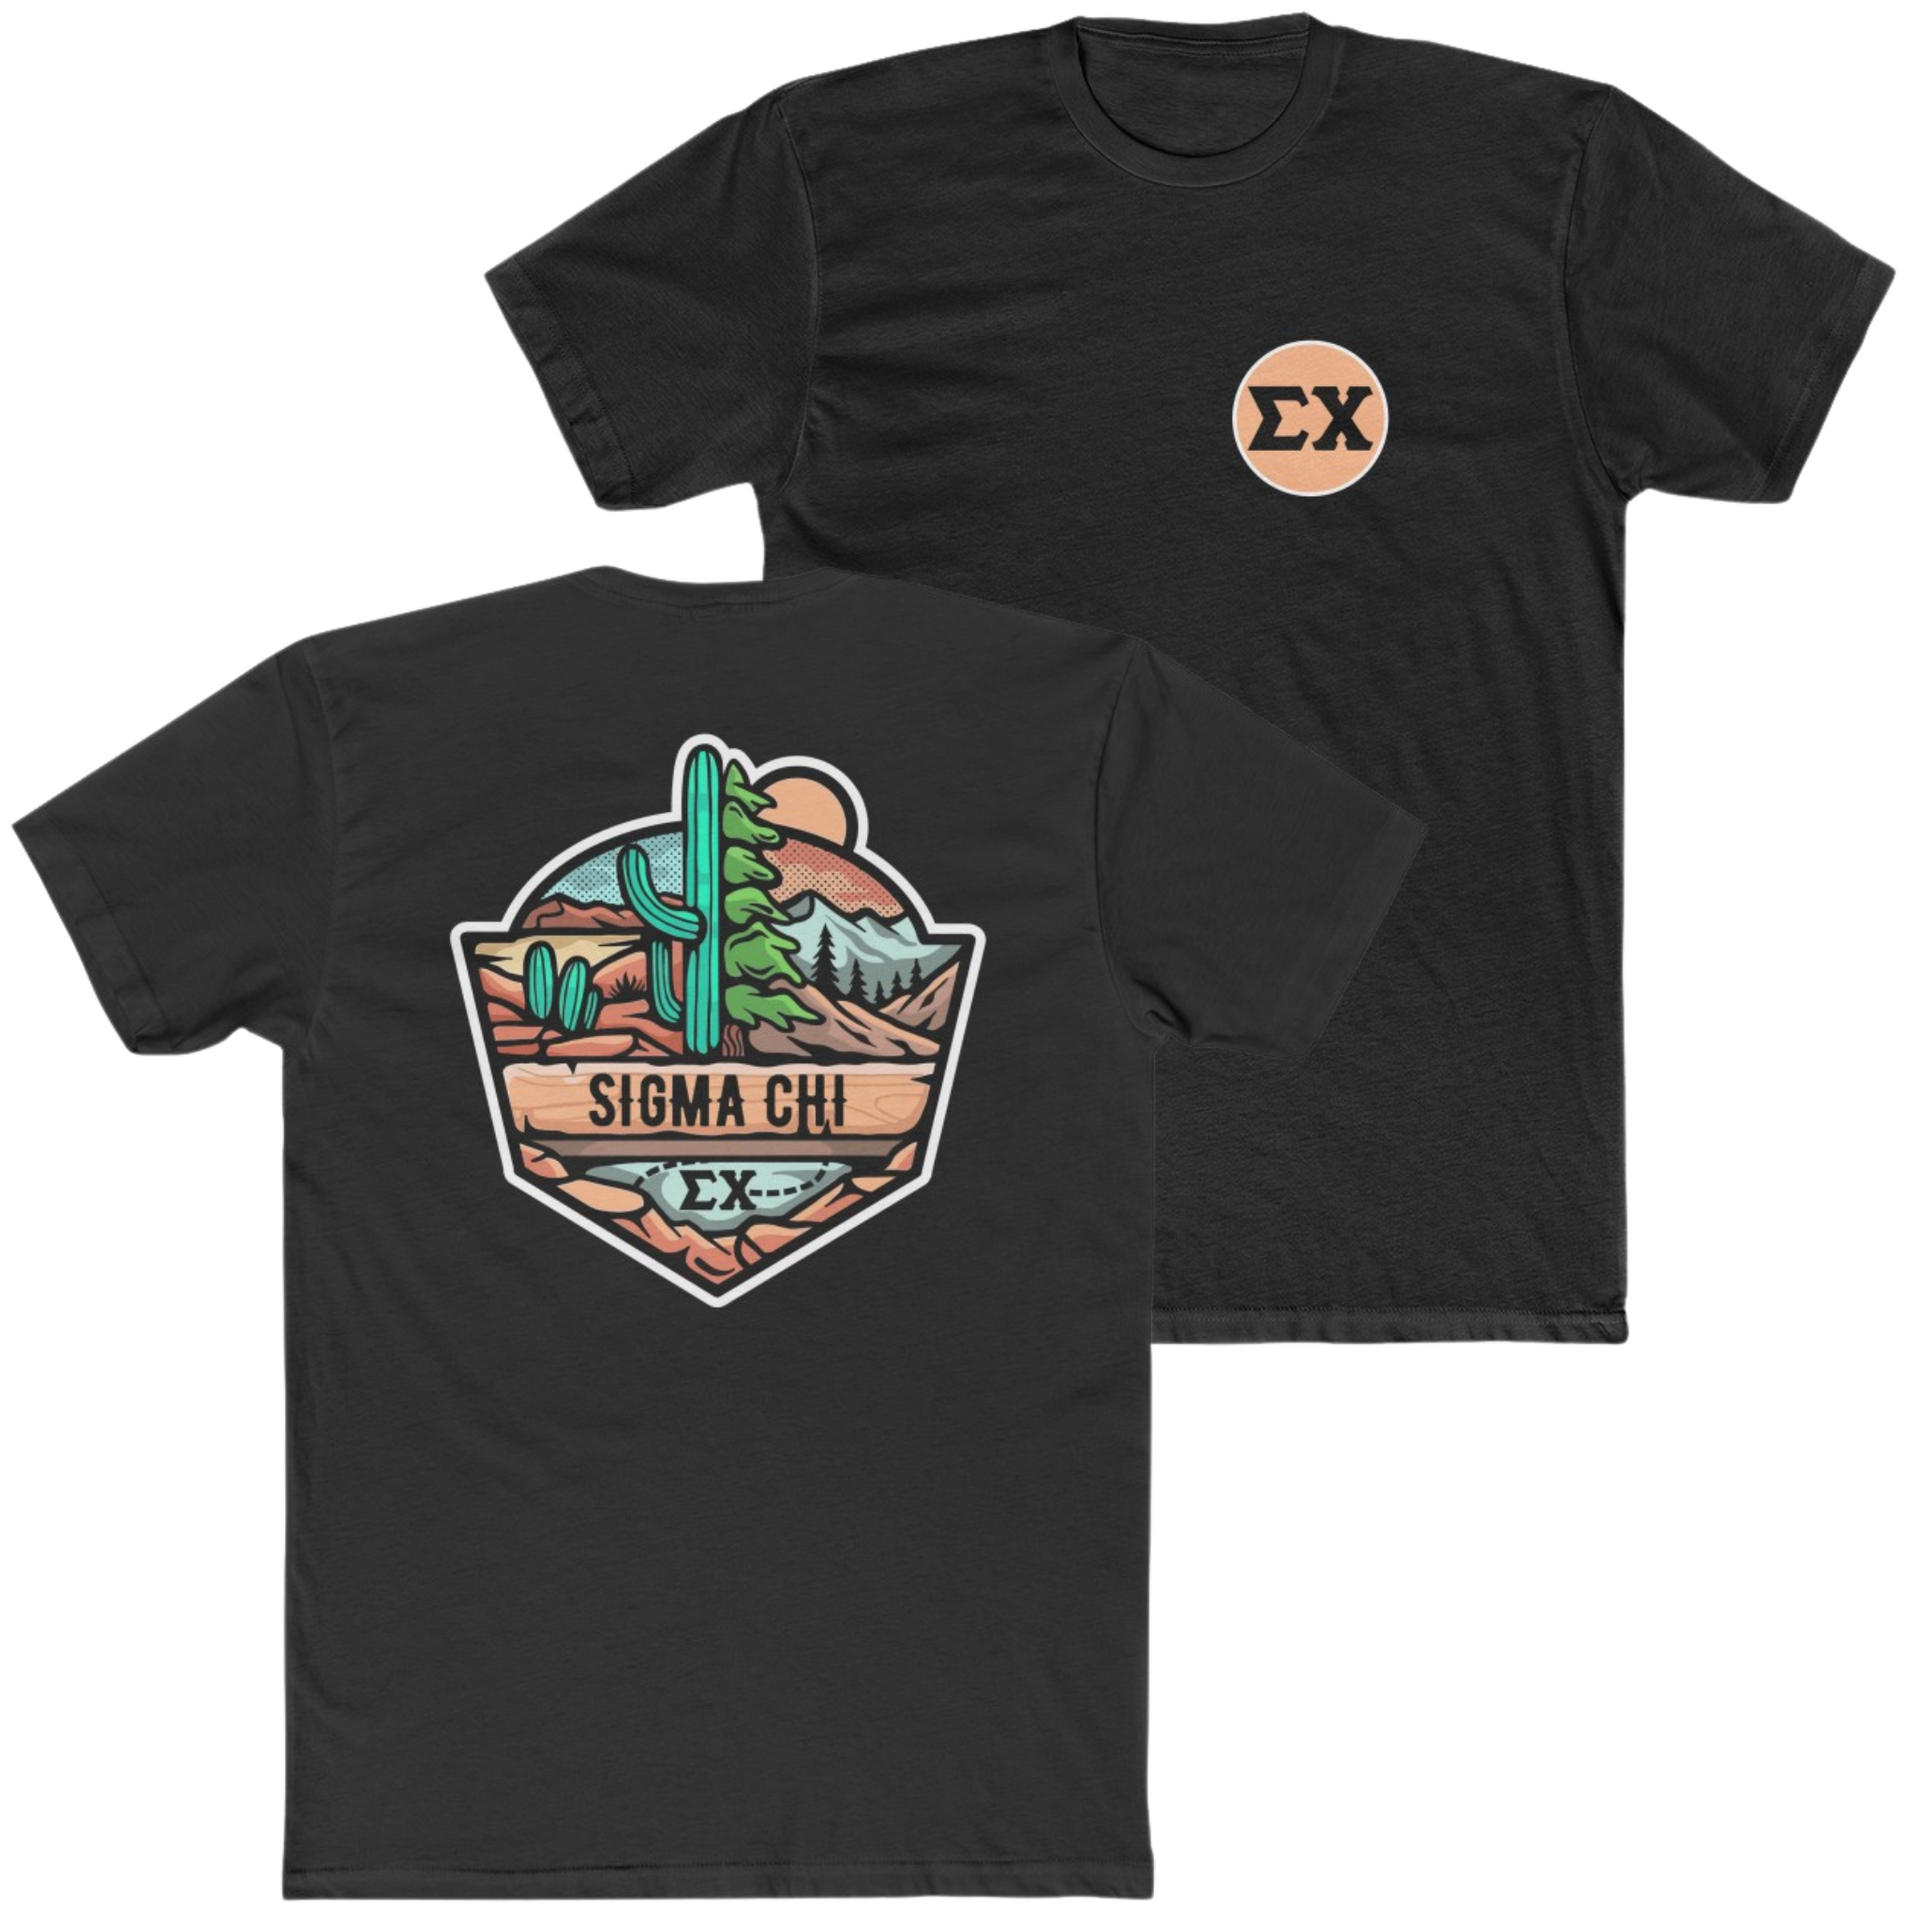 Black Sigma Chi Graphic T-Shirt | Desert Mountains | Sigma Chi Fraternity Apparel